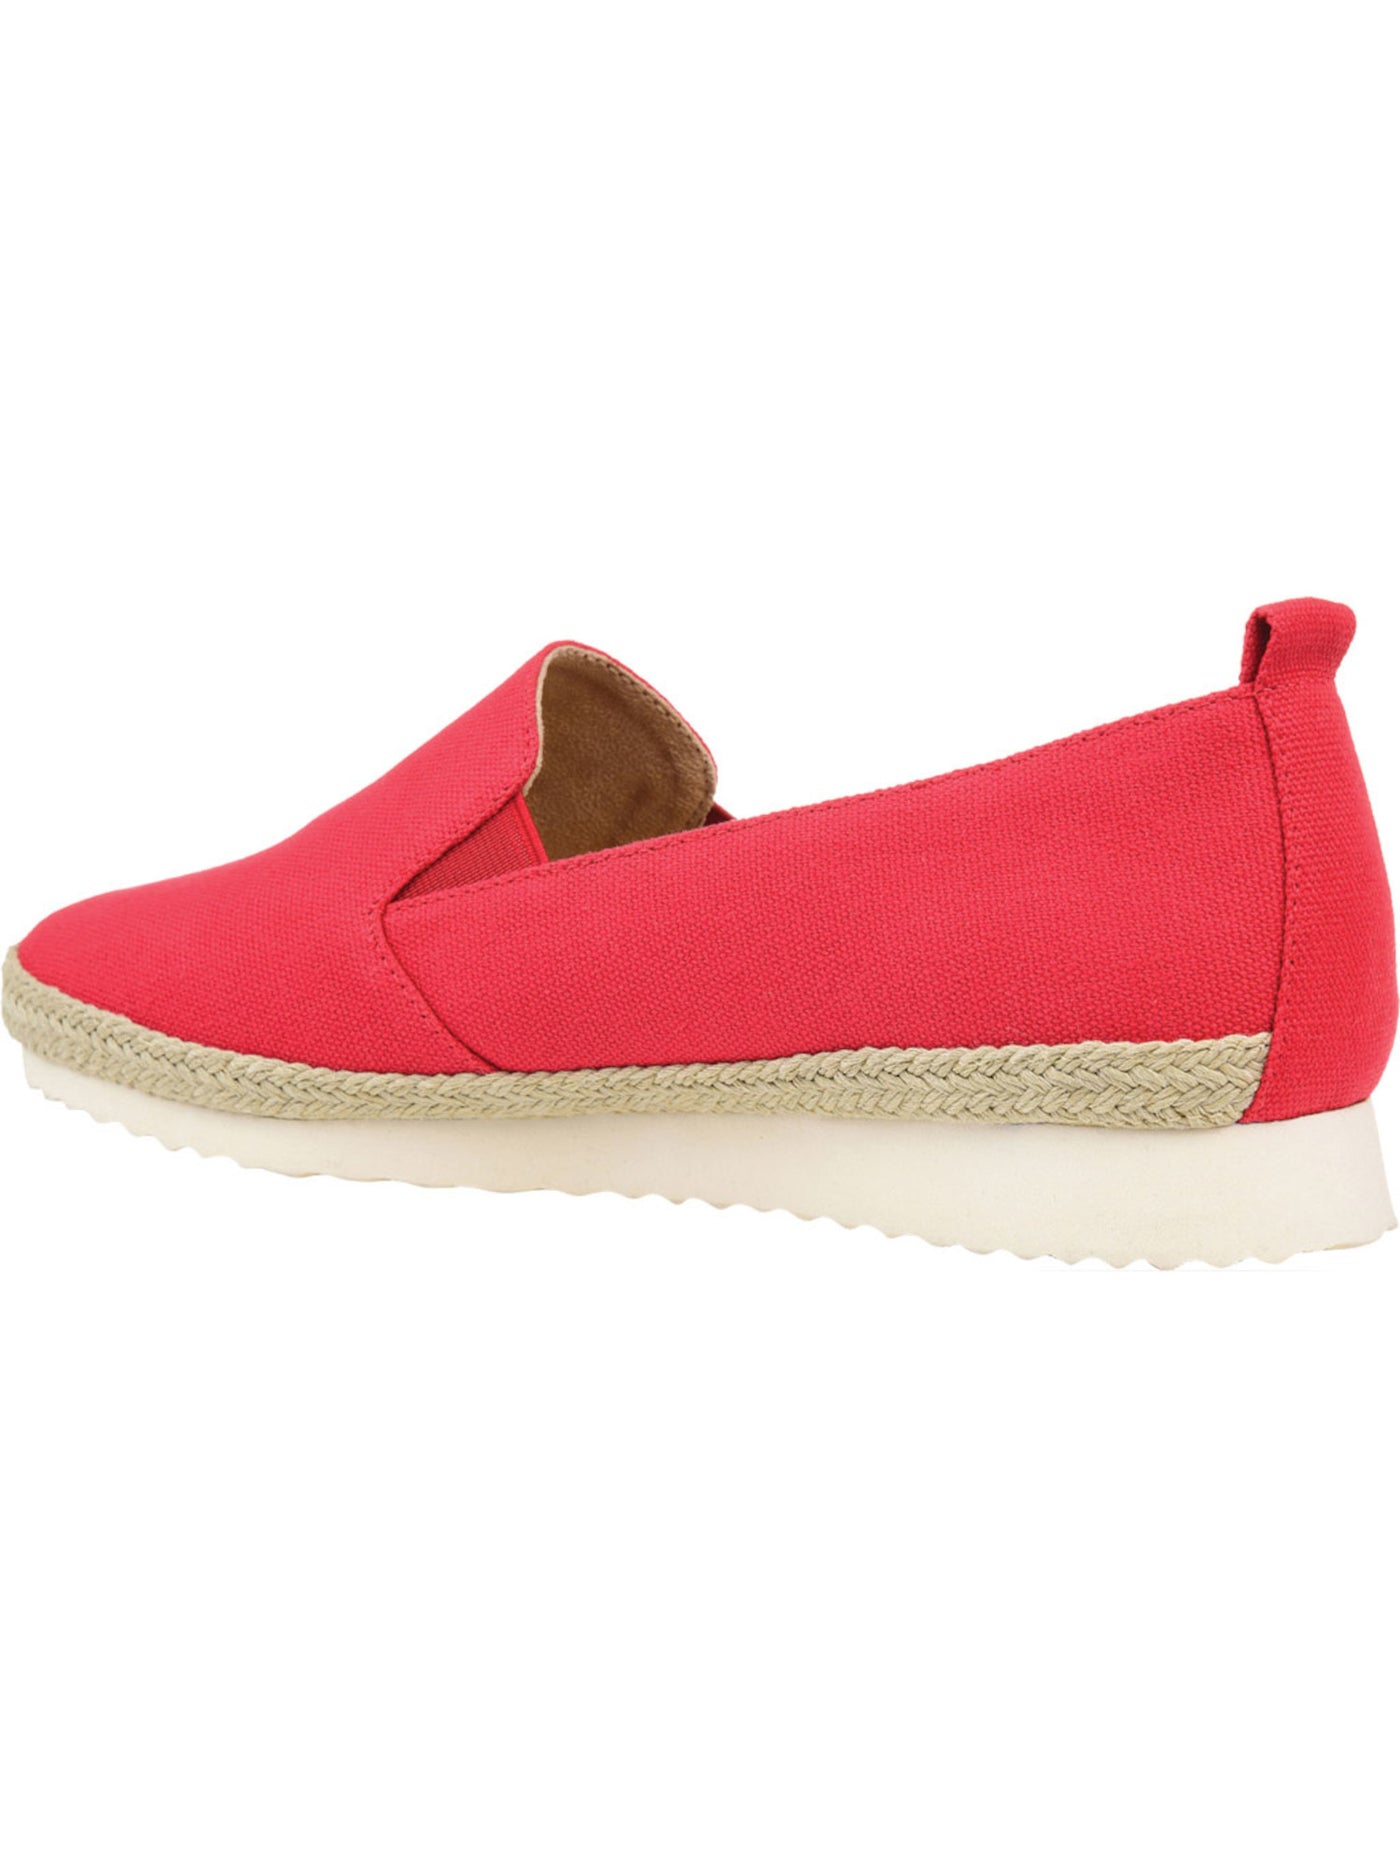 JOURNEE COLLECTION Womens Red Twin Side Gore Back Pull Tab Comfort Leela Round Toe Wedge Slip On Espadrille Shoes 6 M